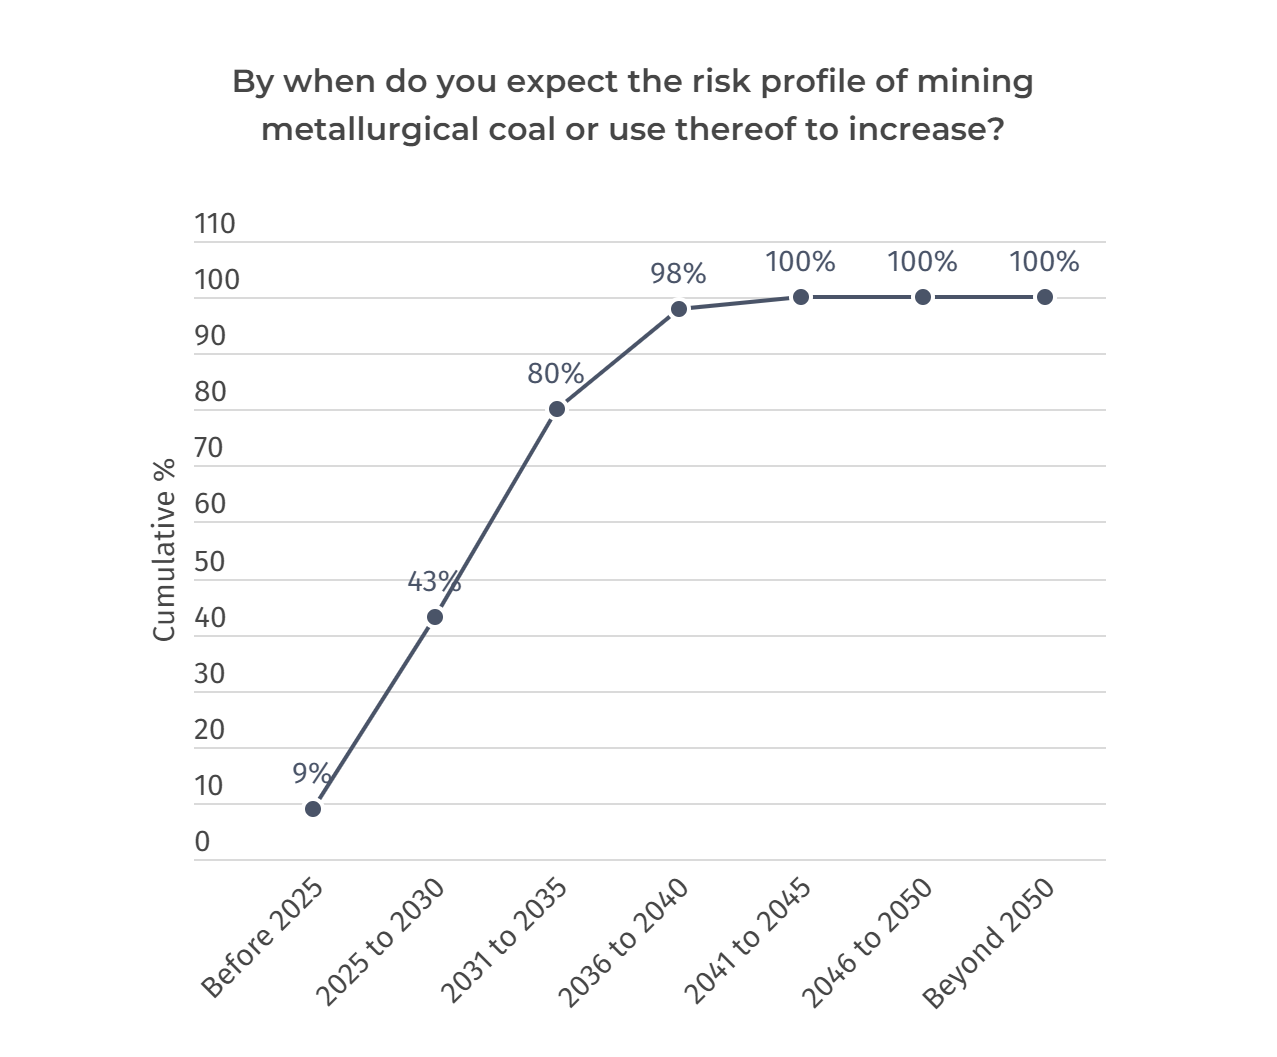 80% of investors believe metallurgical coal’s risk profile will increase in the next decade.